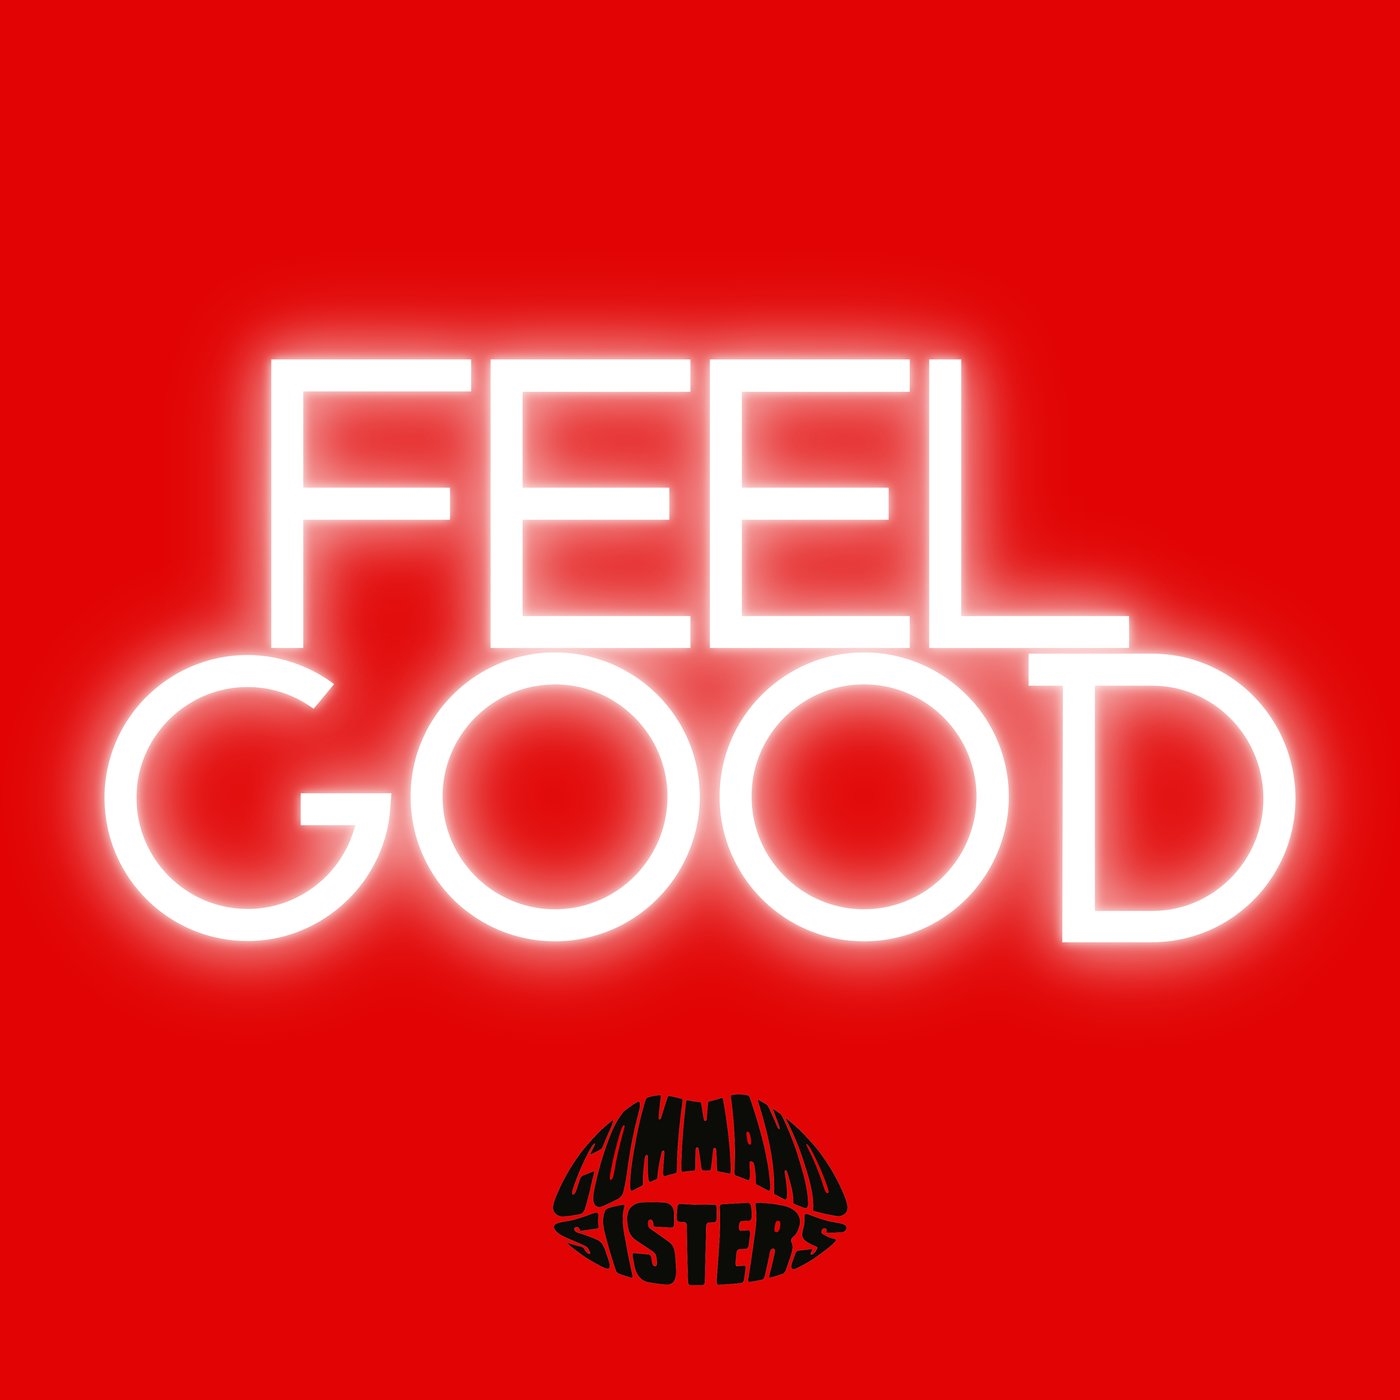 Art for Feel Good (C) by Command Sisters